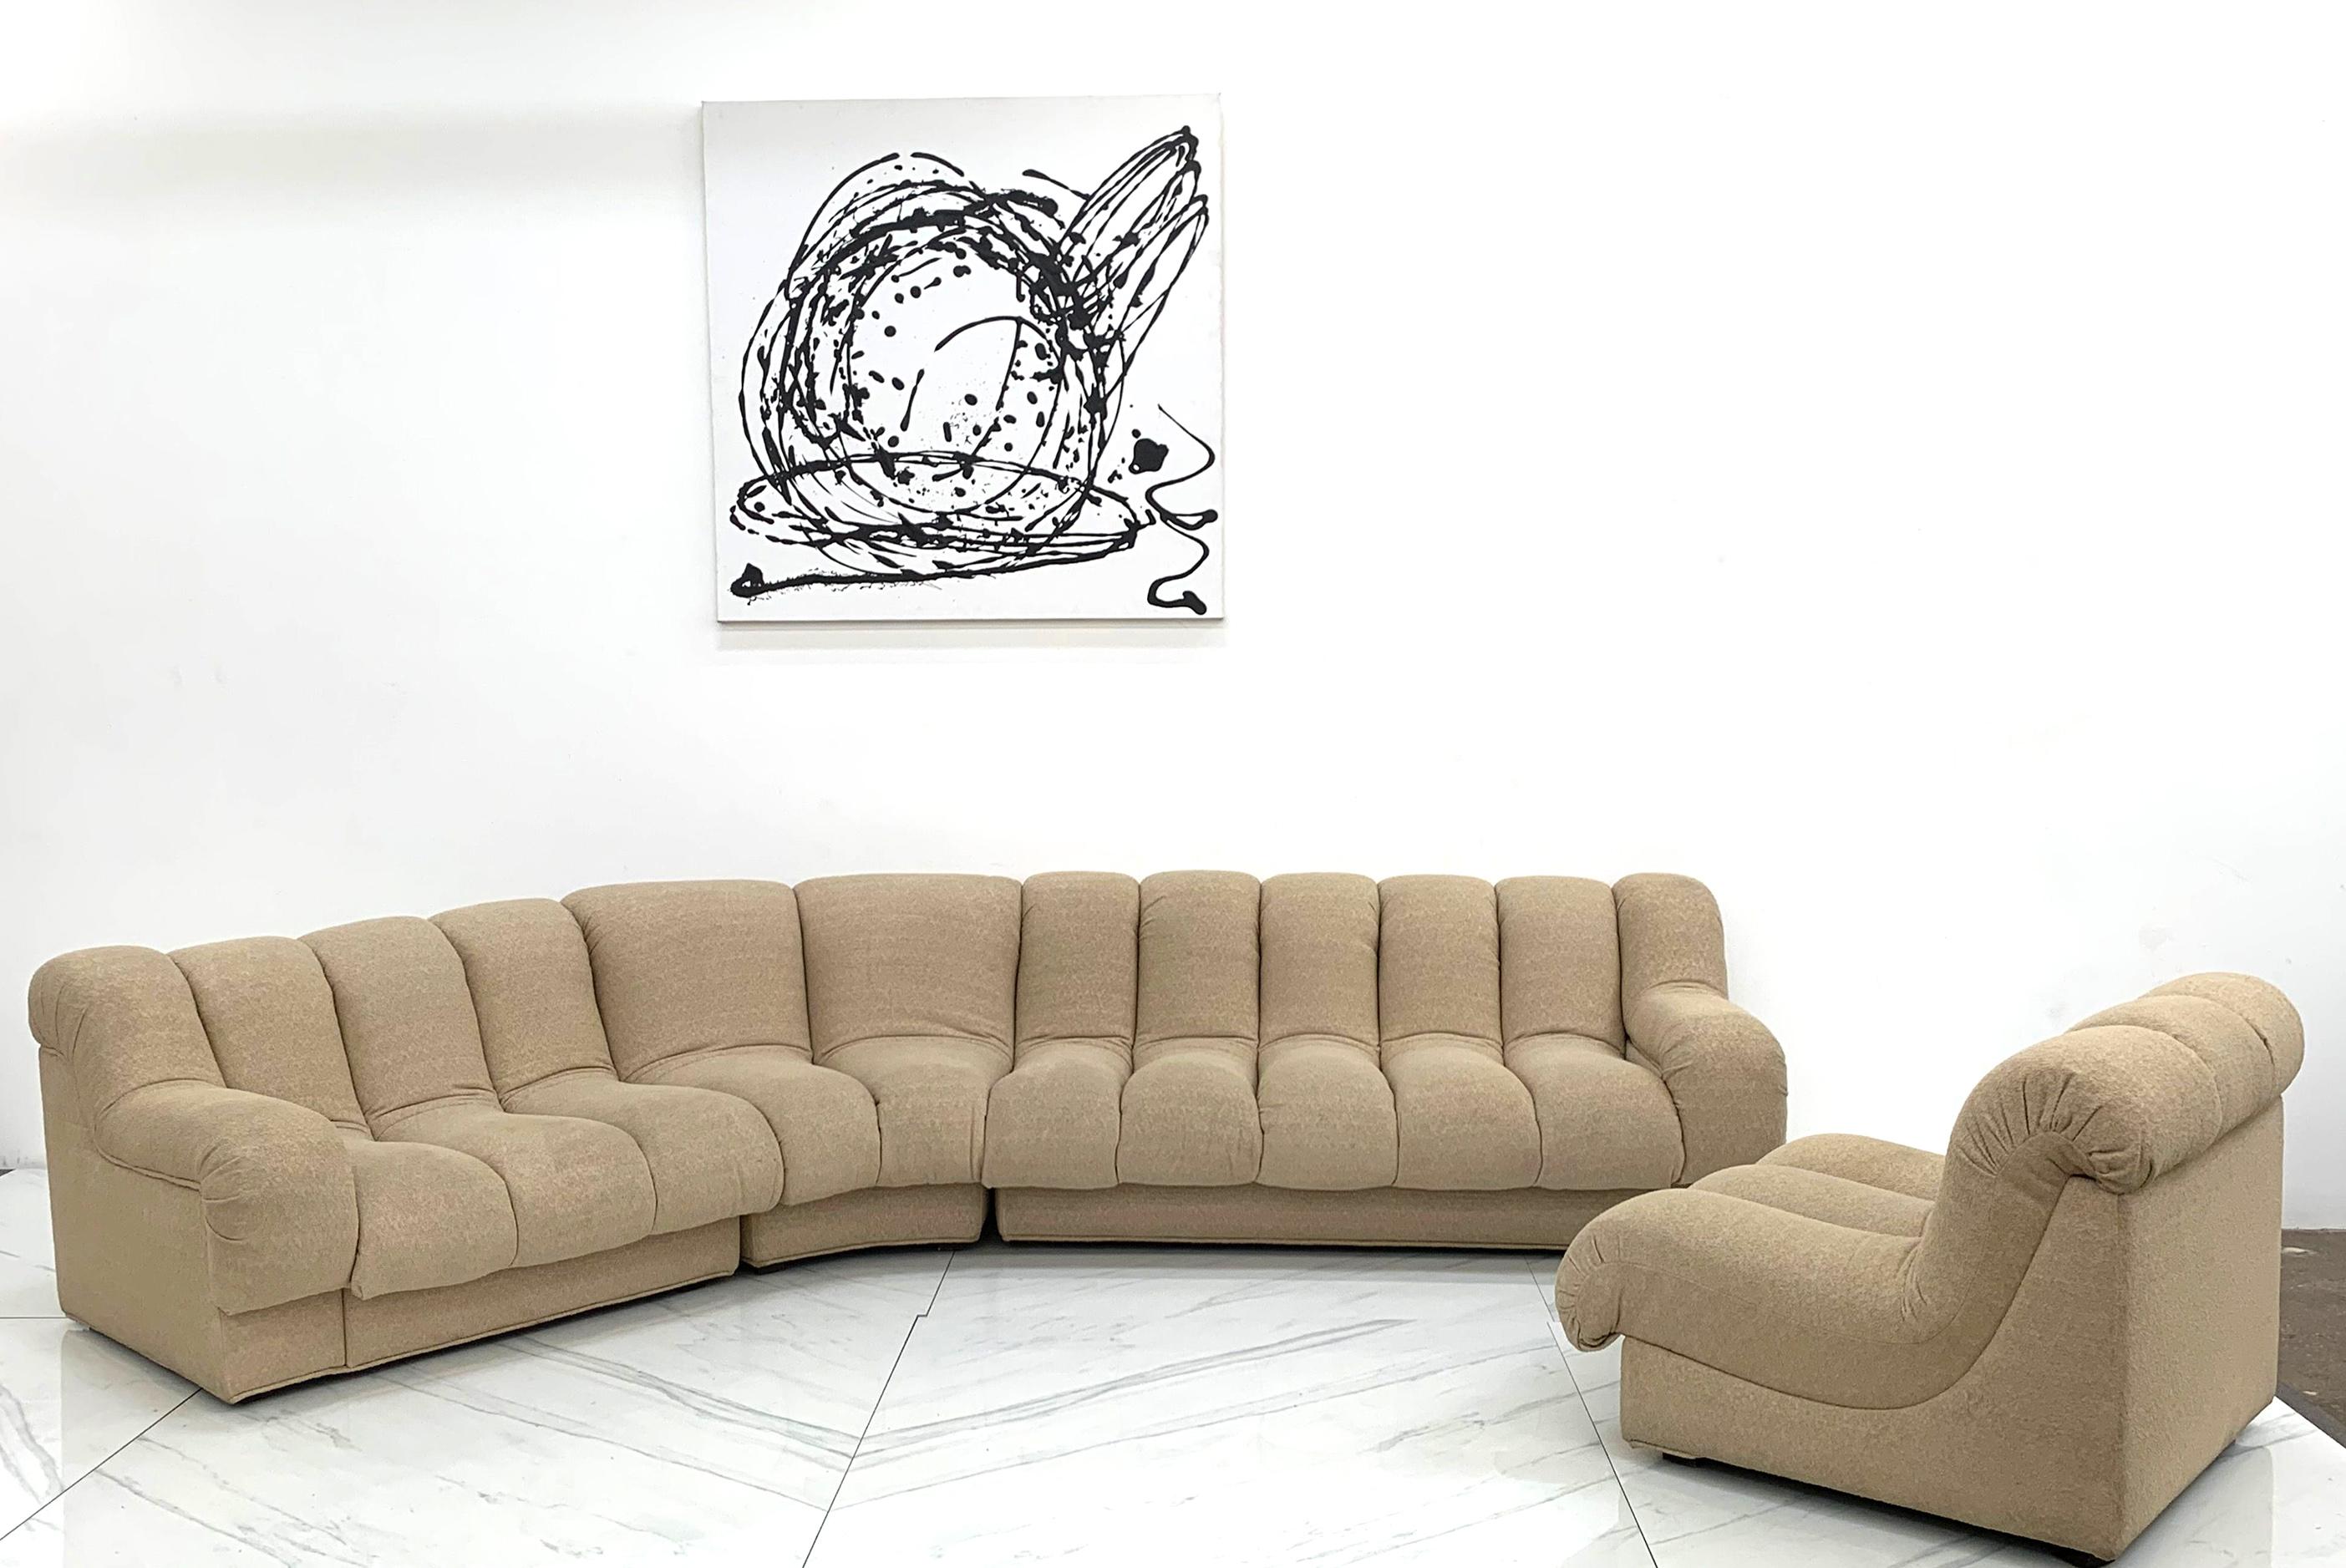 This sofa is absolutely stunning! A 1990's 4 piece modular sectional sofa that could easily be mistaken for a De Sede DS600. This nonstop style sectional features a channel tufted design that's unmistakably modern and is very much De Sede or Steve